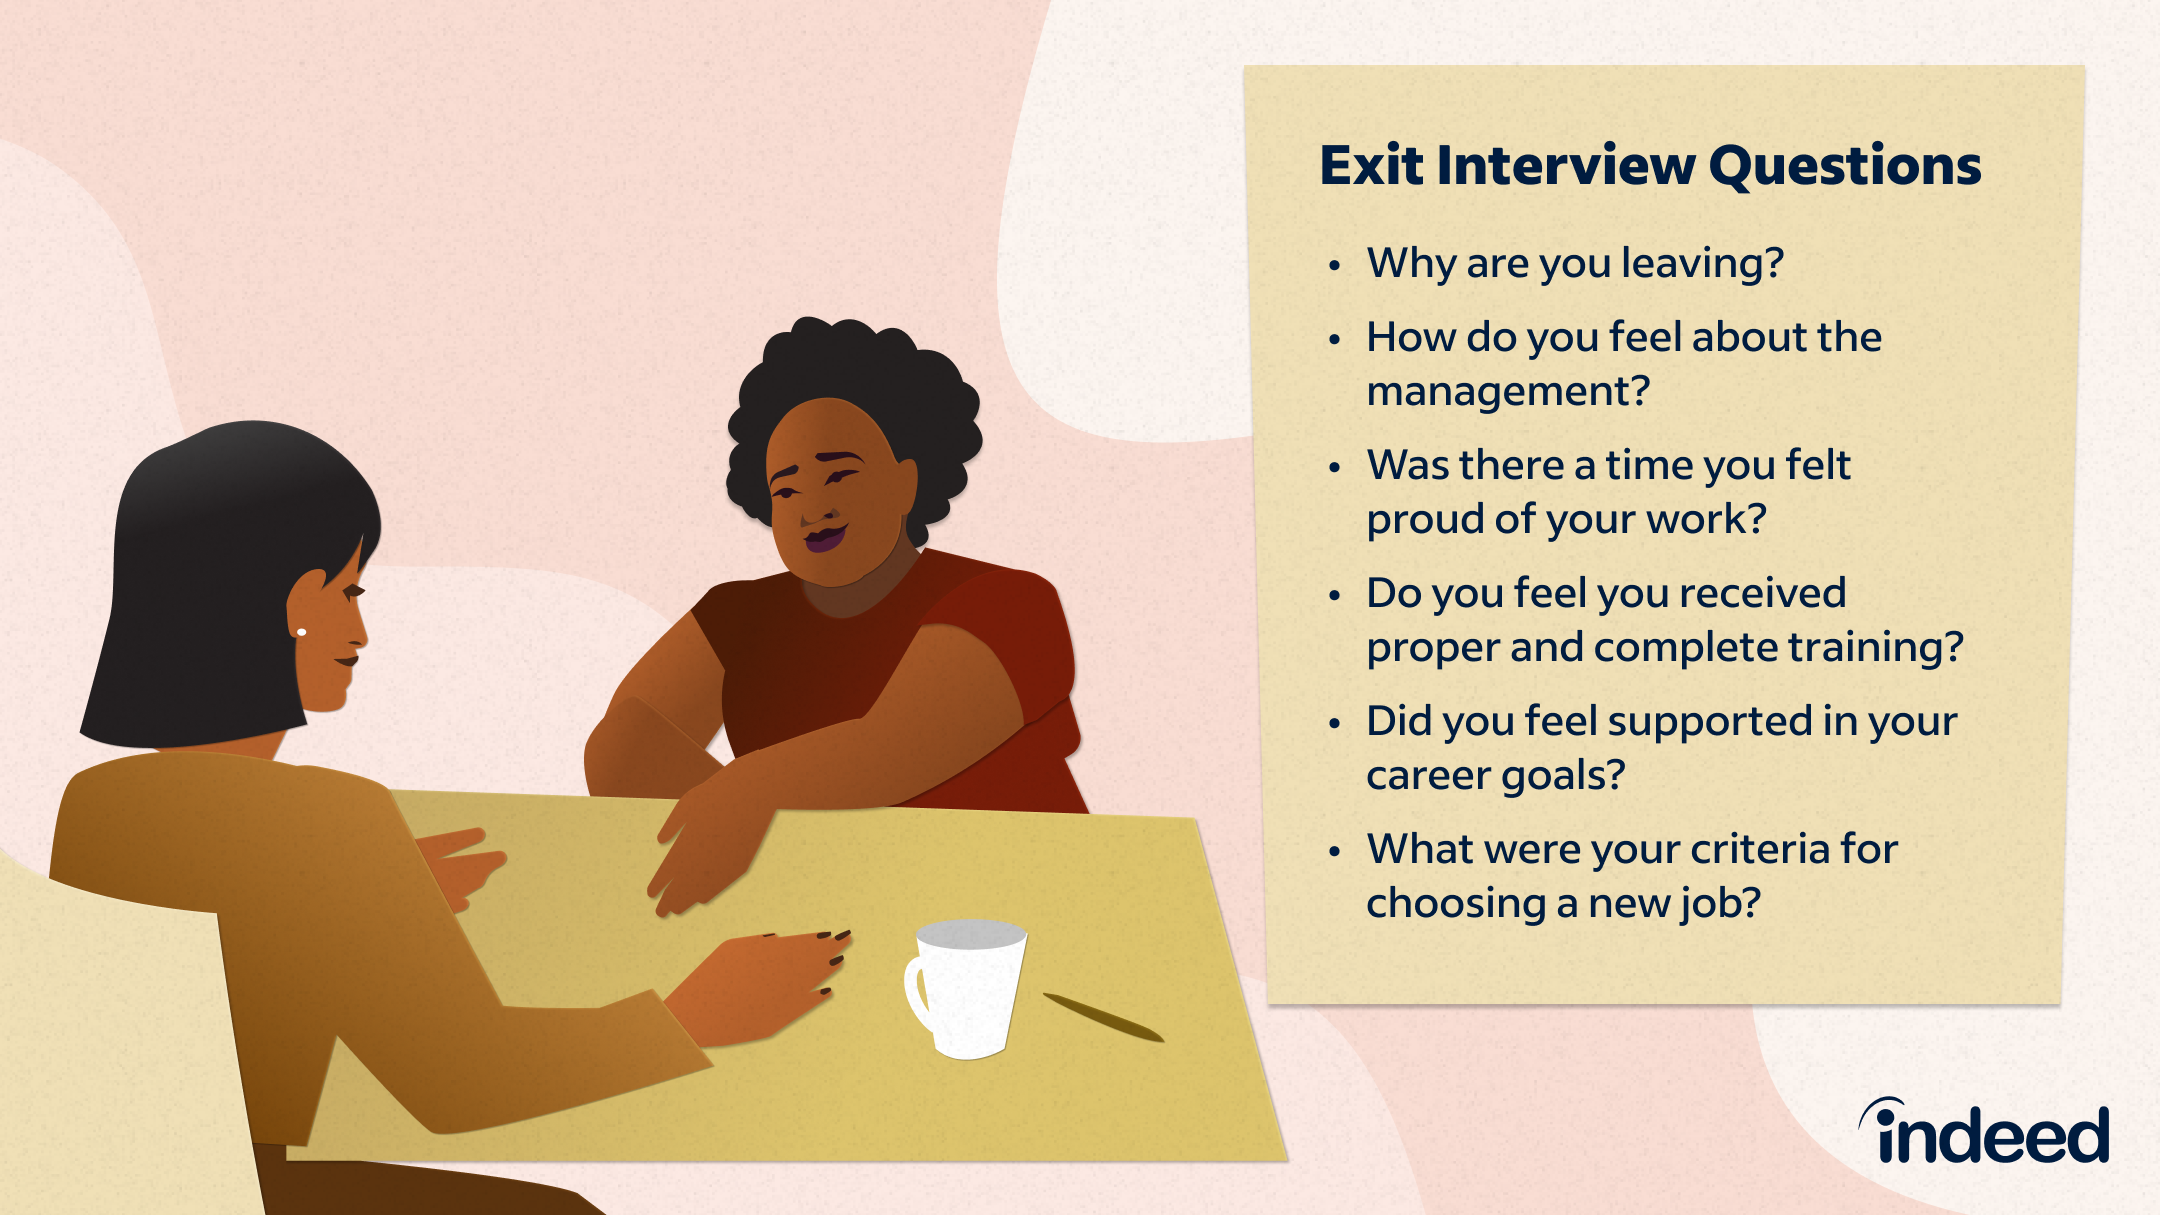 Participant Exit Interview Feedback (n = 3).